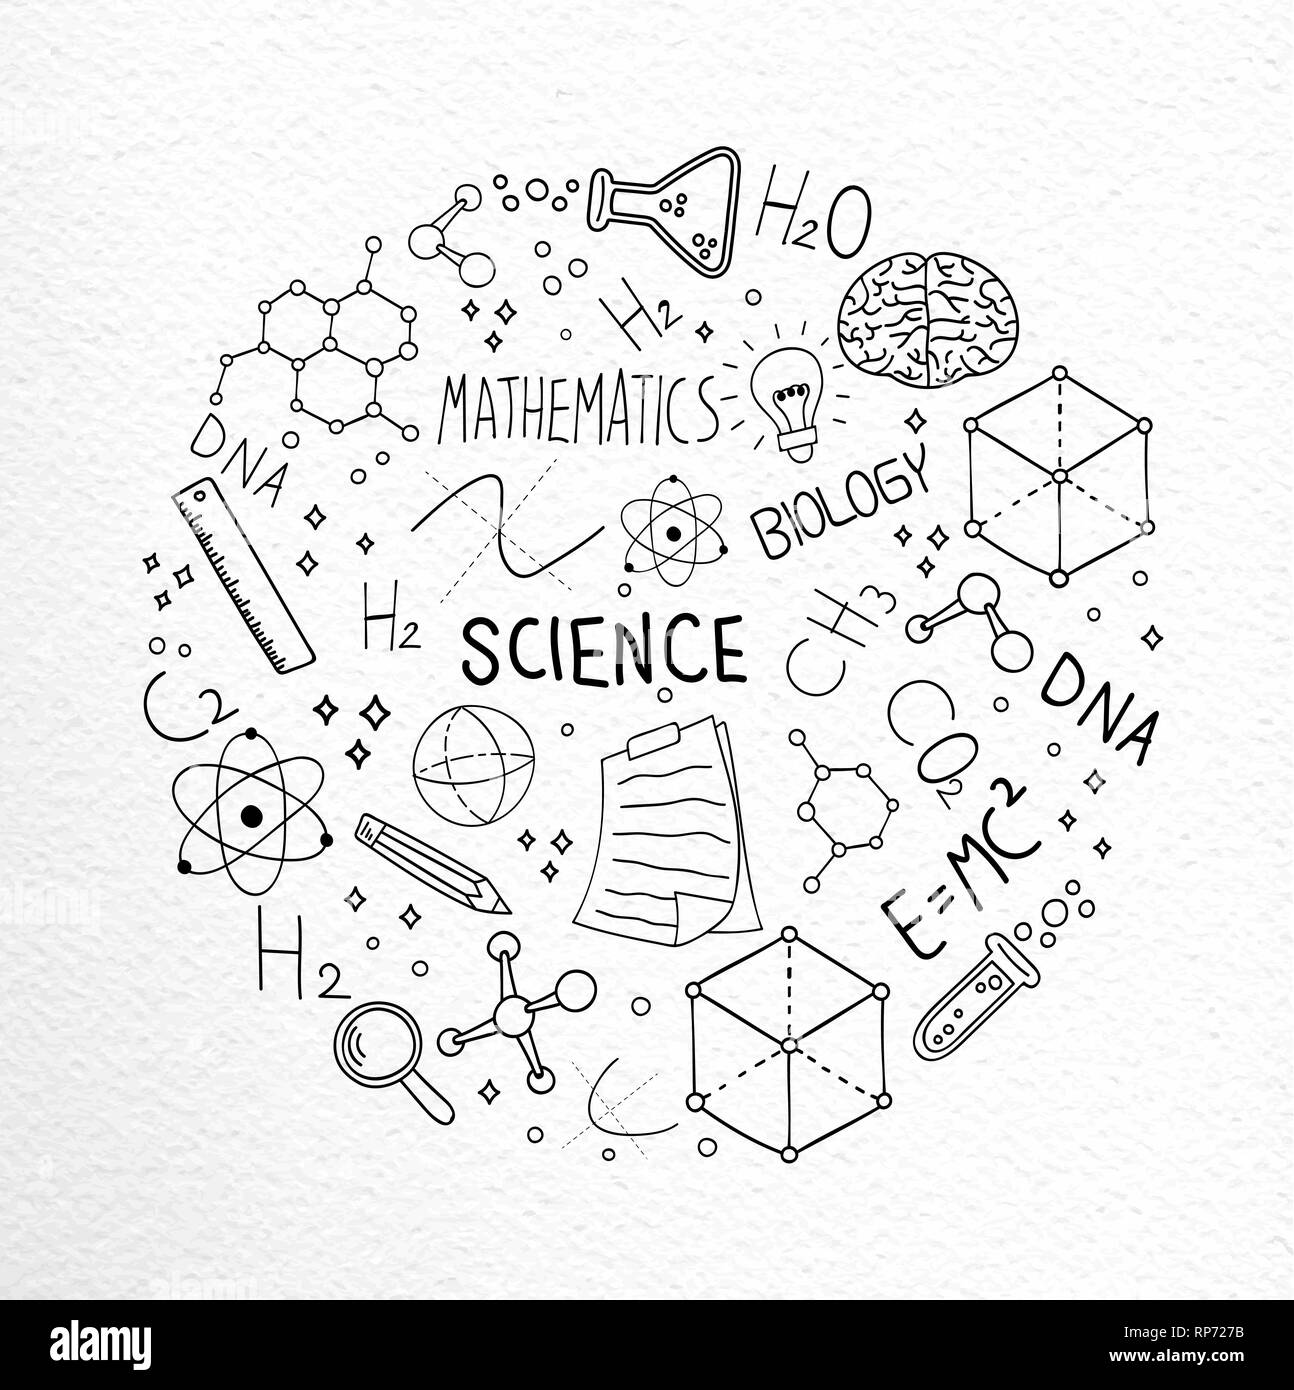 Science illustration concept of hand drawn doodle icons for education and research over textured paper. Stock Vector